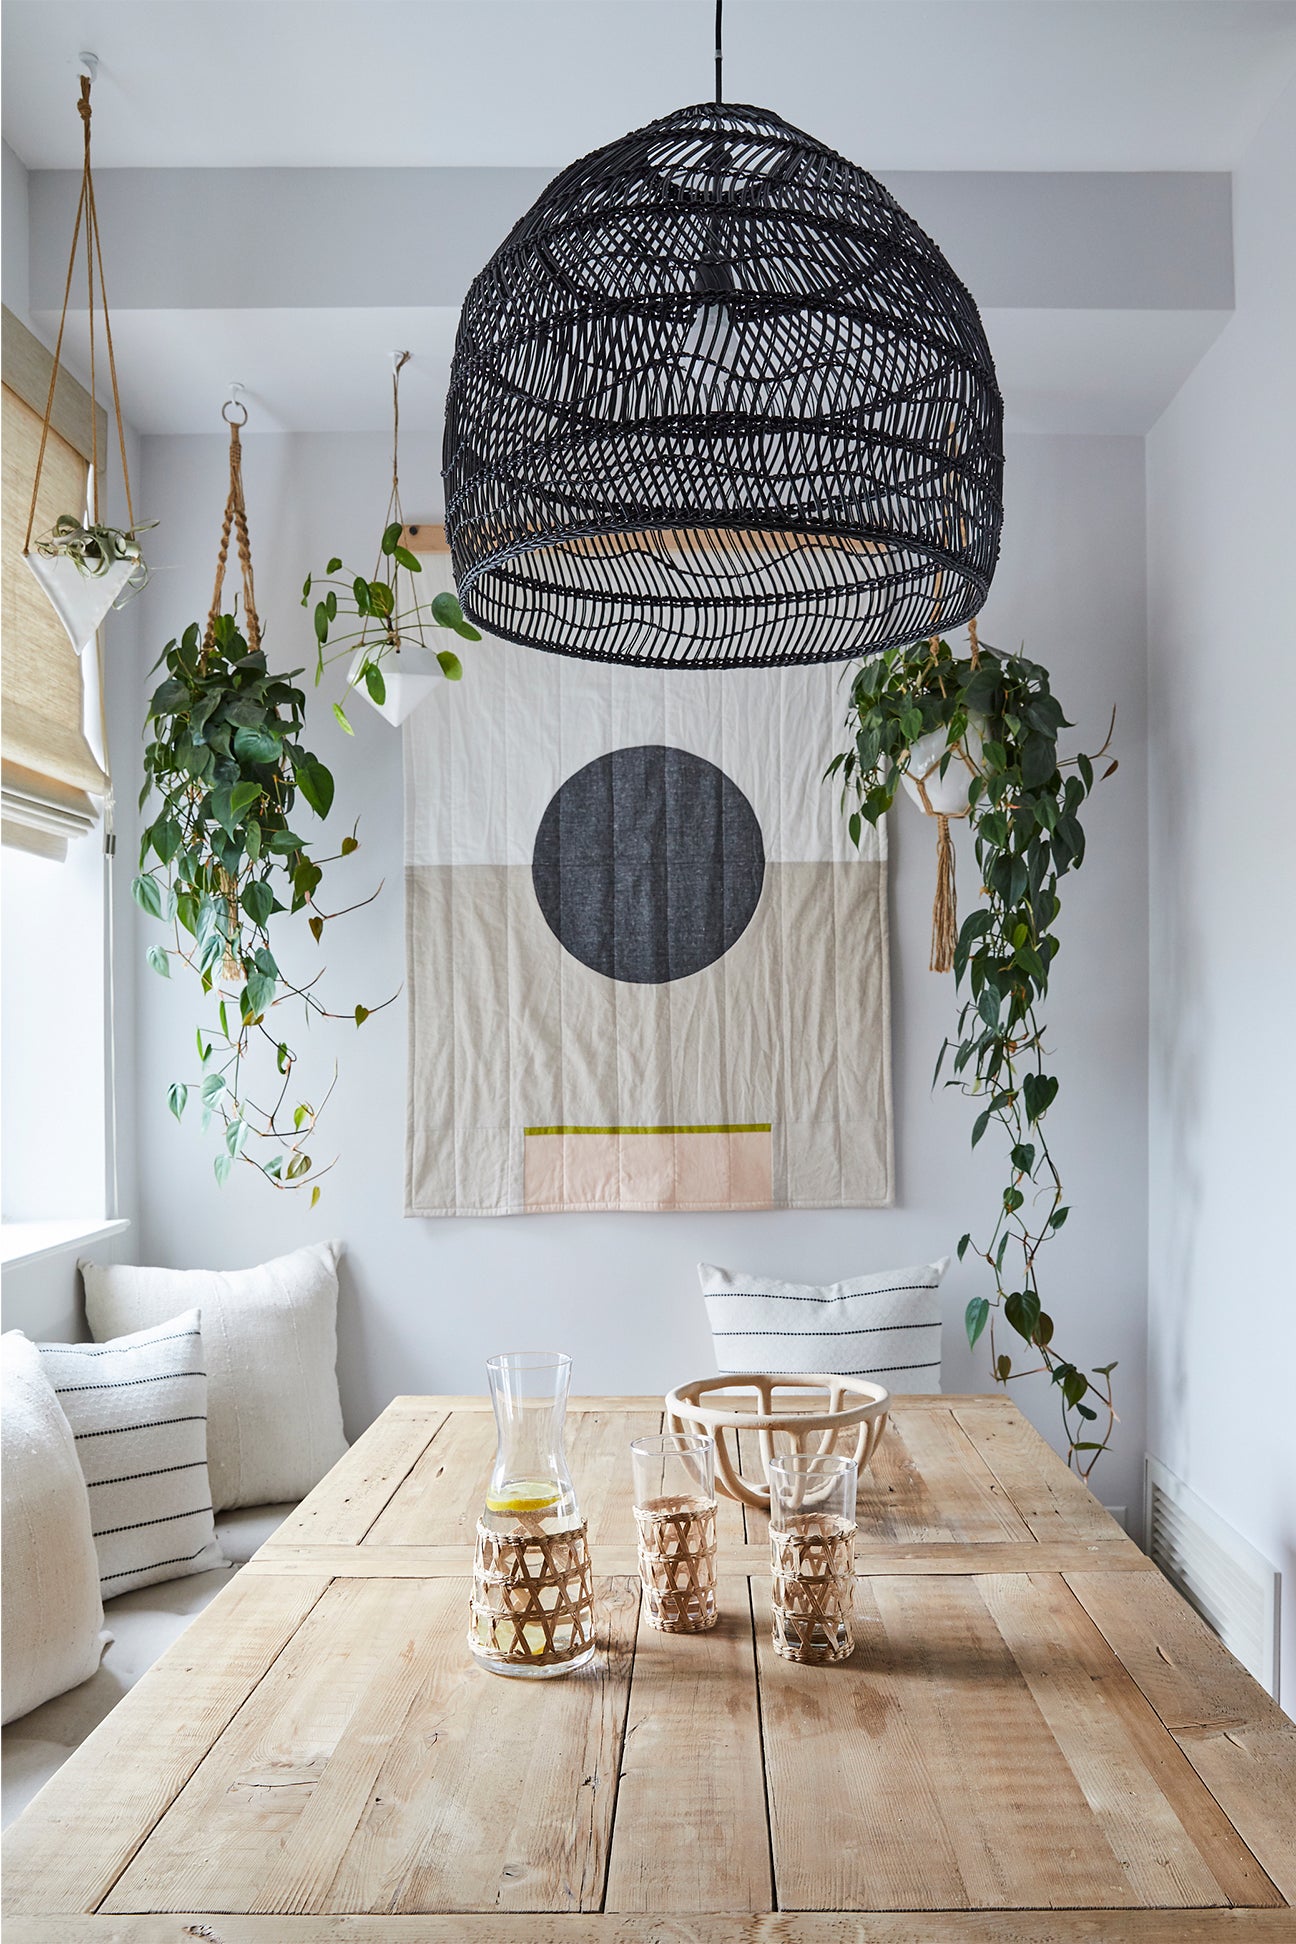 Dining nook with plants and wall hanging